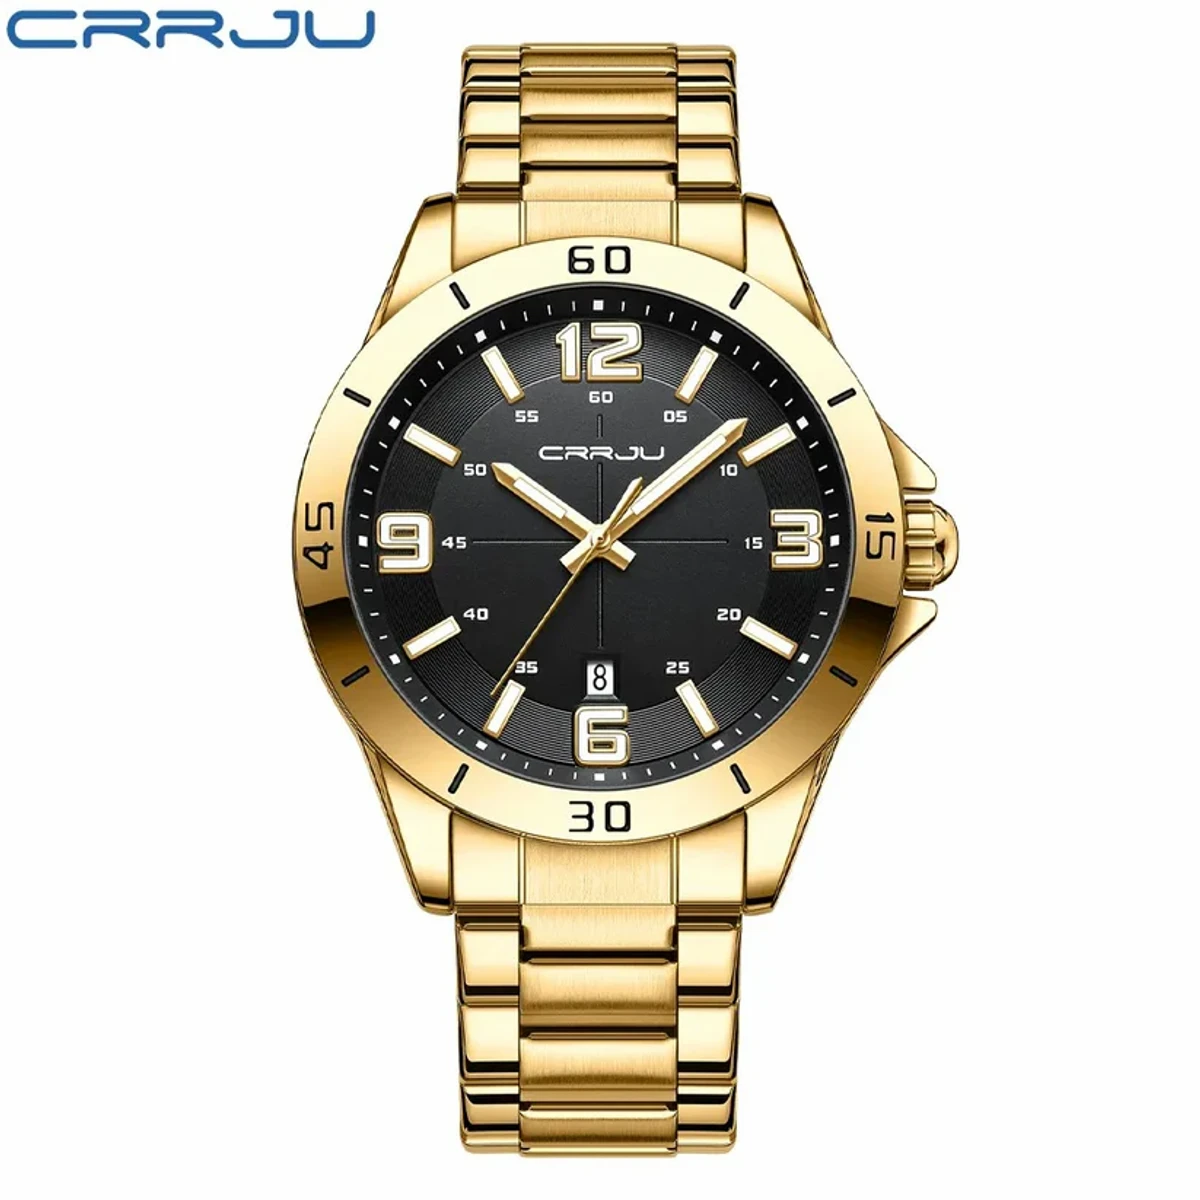 CRRJU Business Men Luxury Watches Stainless Steel Quartz Wrsitwatches Male Auto Date Clock with Luminous Hands